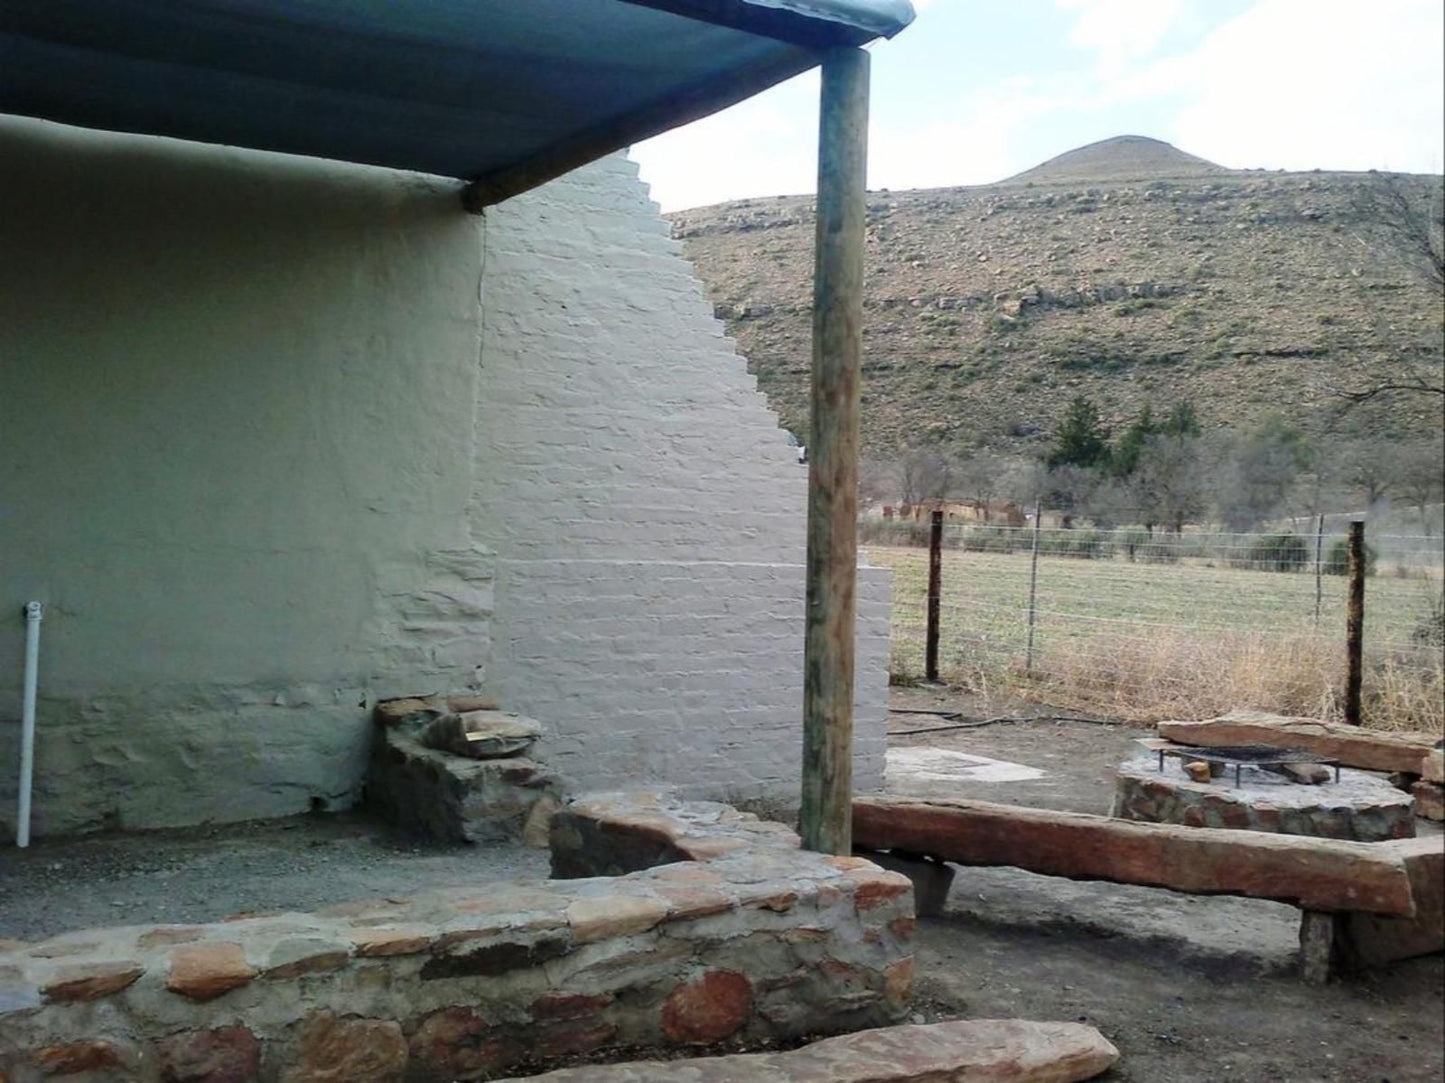 Die Kapokbosskuur Nieu Bethesda Eastern Cape South Africa Unsaturated, Fireplace, Ruin, Architecture, Framing, Highland, Nature